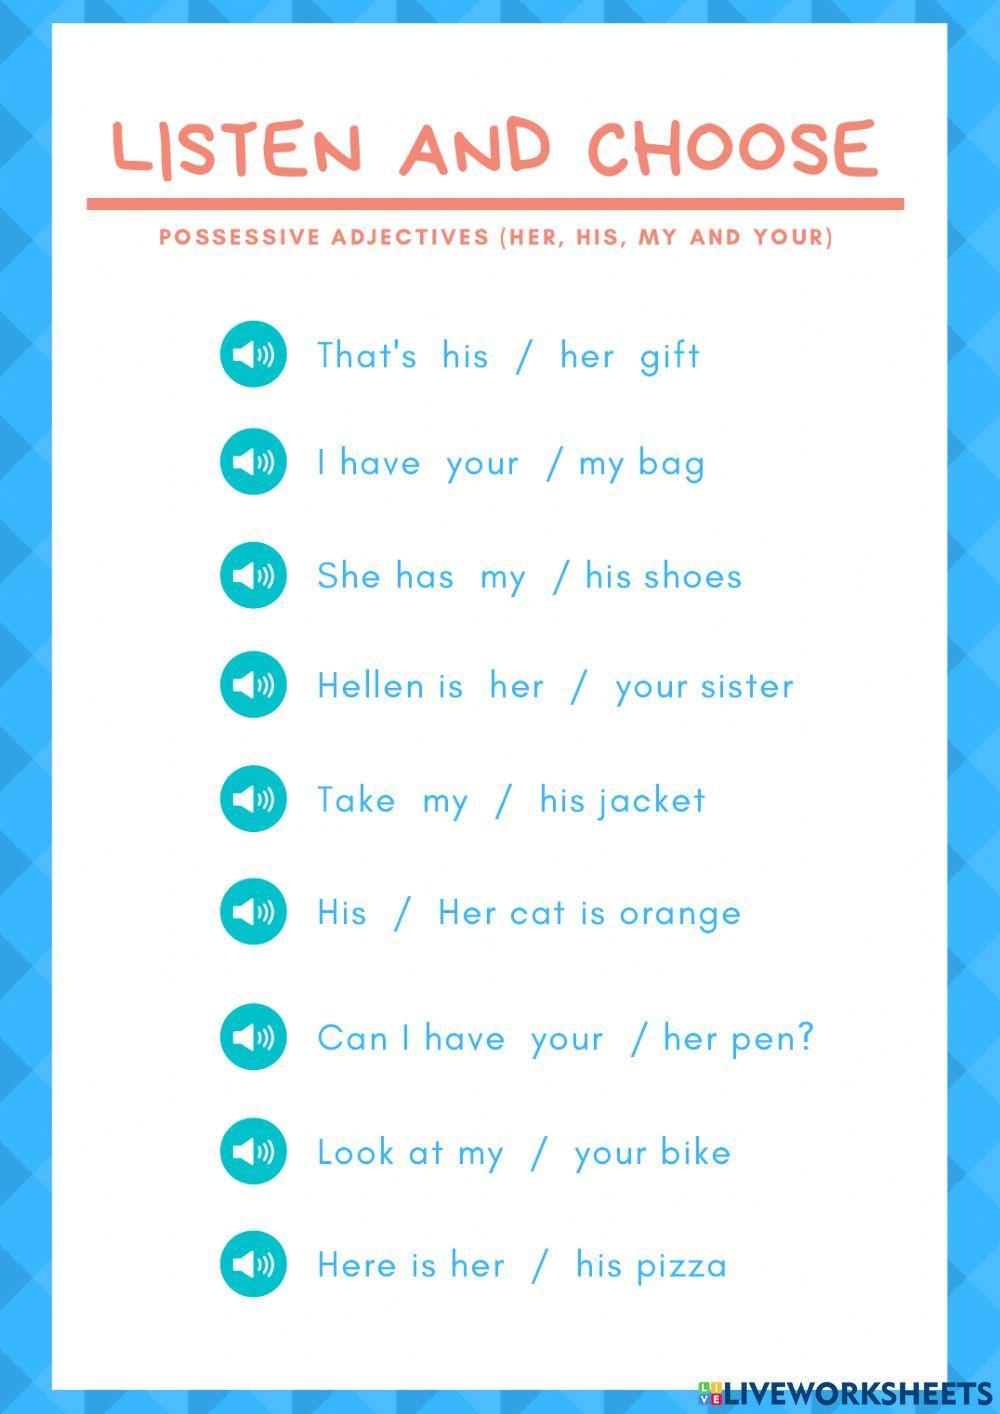 Possessive adjectives. His, her, my and your